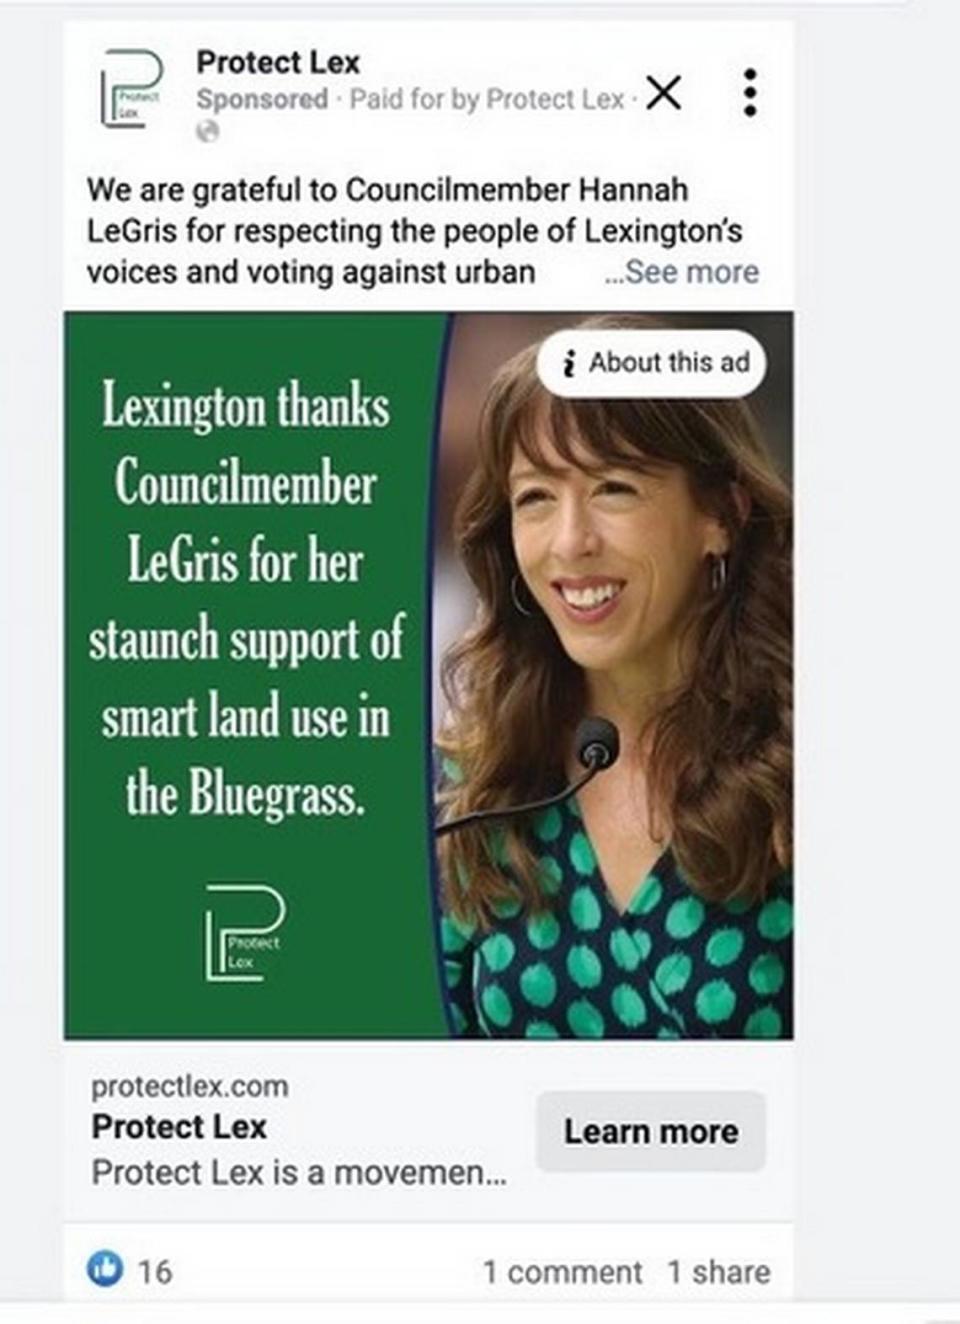 Protect Lex, a new political action committee, has formed to back Lexington council candidates that support smart growth land use policies.